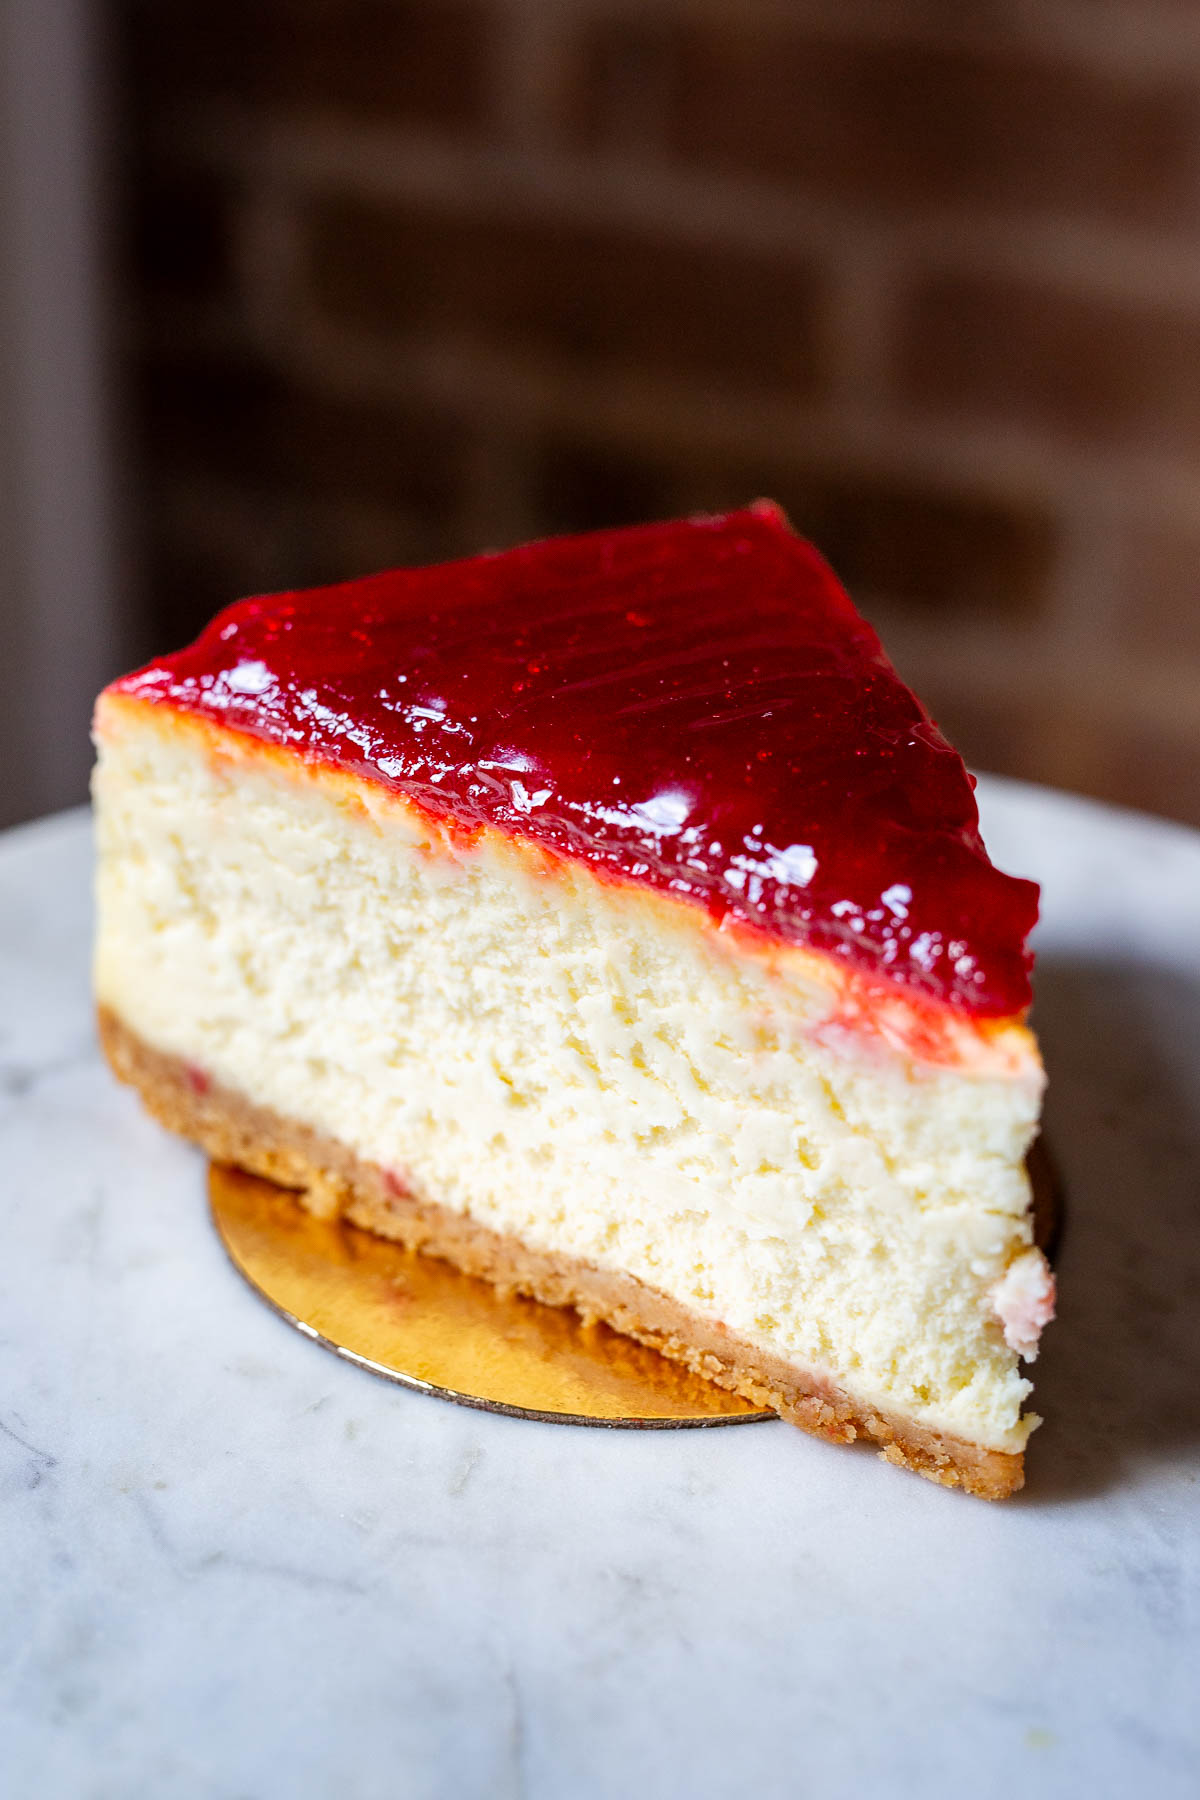 Strawberry Cheesecake from Artion Bakery in Astoria, Queens